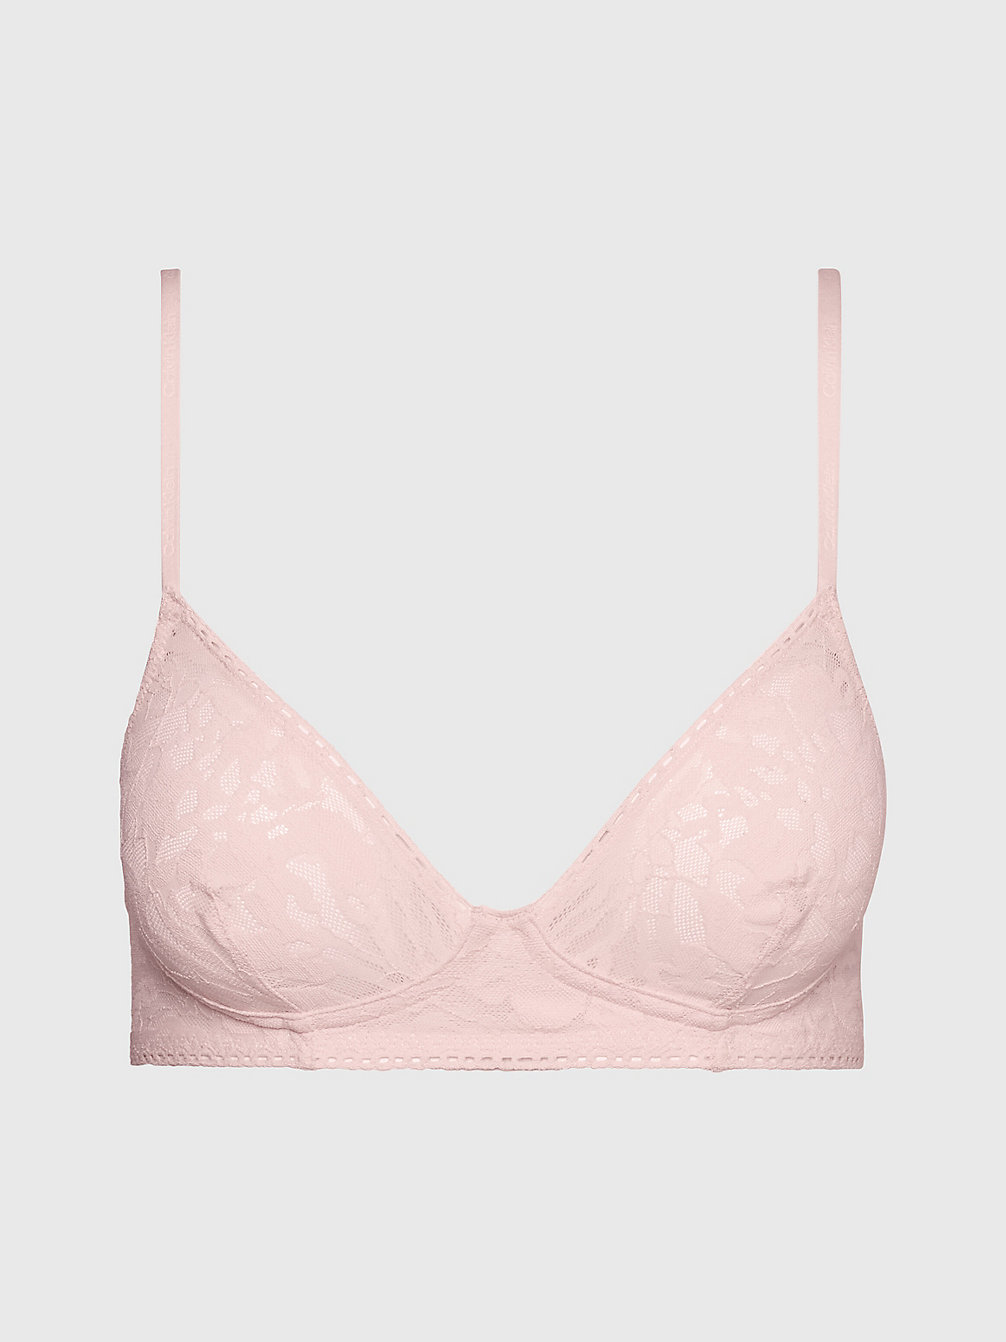 NYMPTHÂ€™S THIGH Brassière - Ultra Soft Lace undefined femmes Calvin Klein